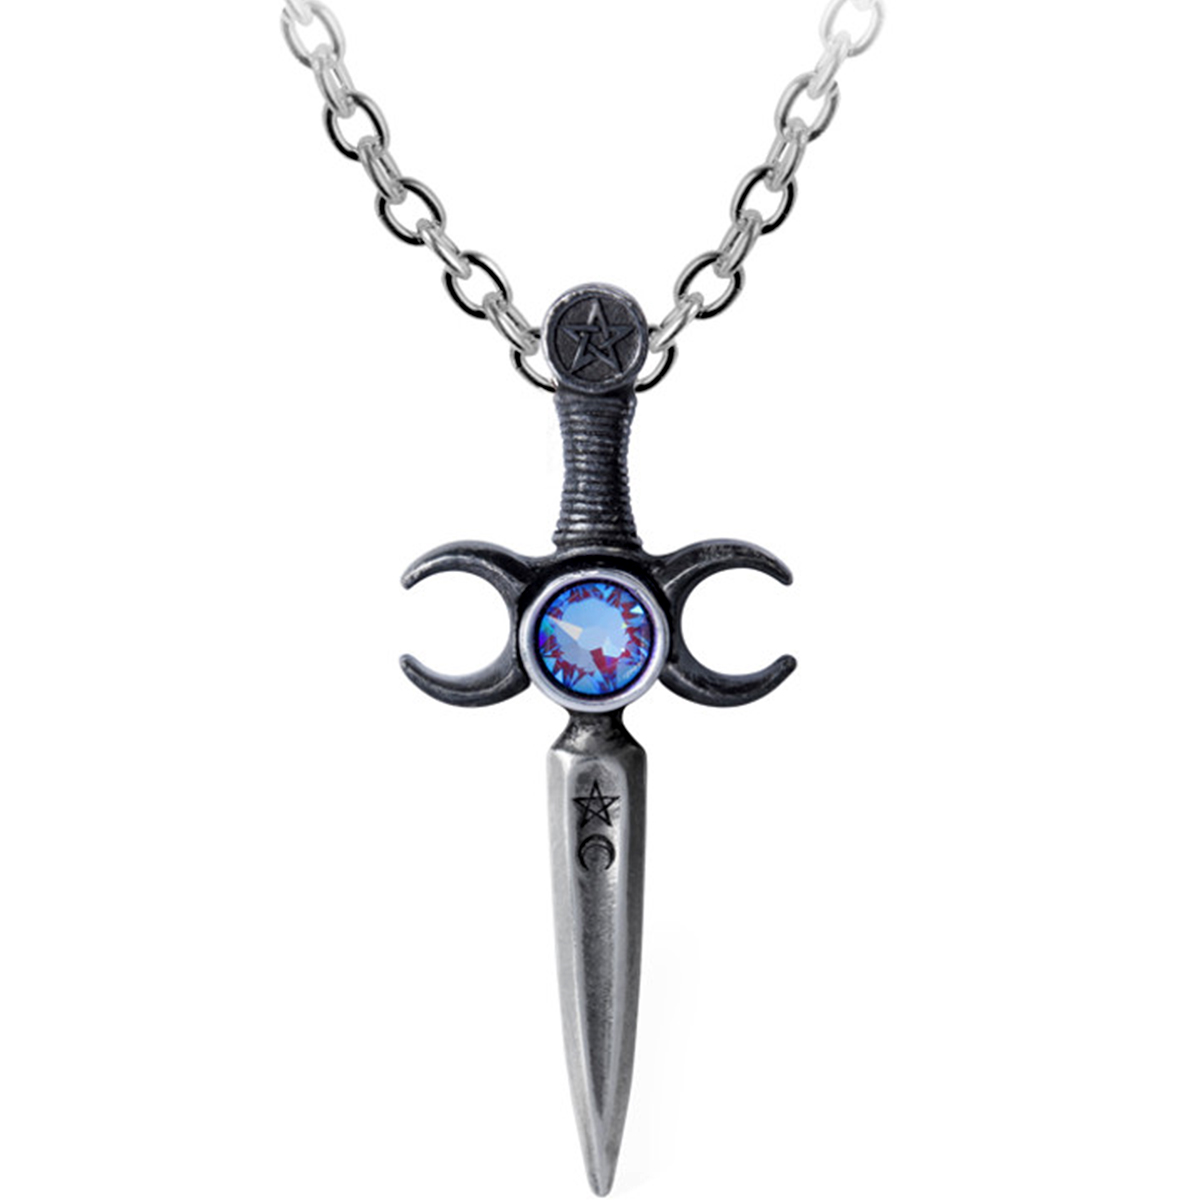 Fairy Tail Accessories Black Steel Ring Necklace transporter